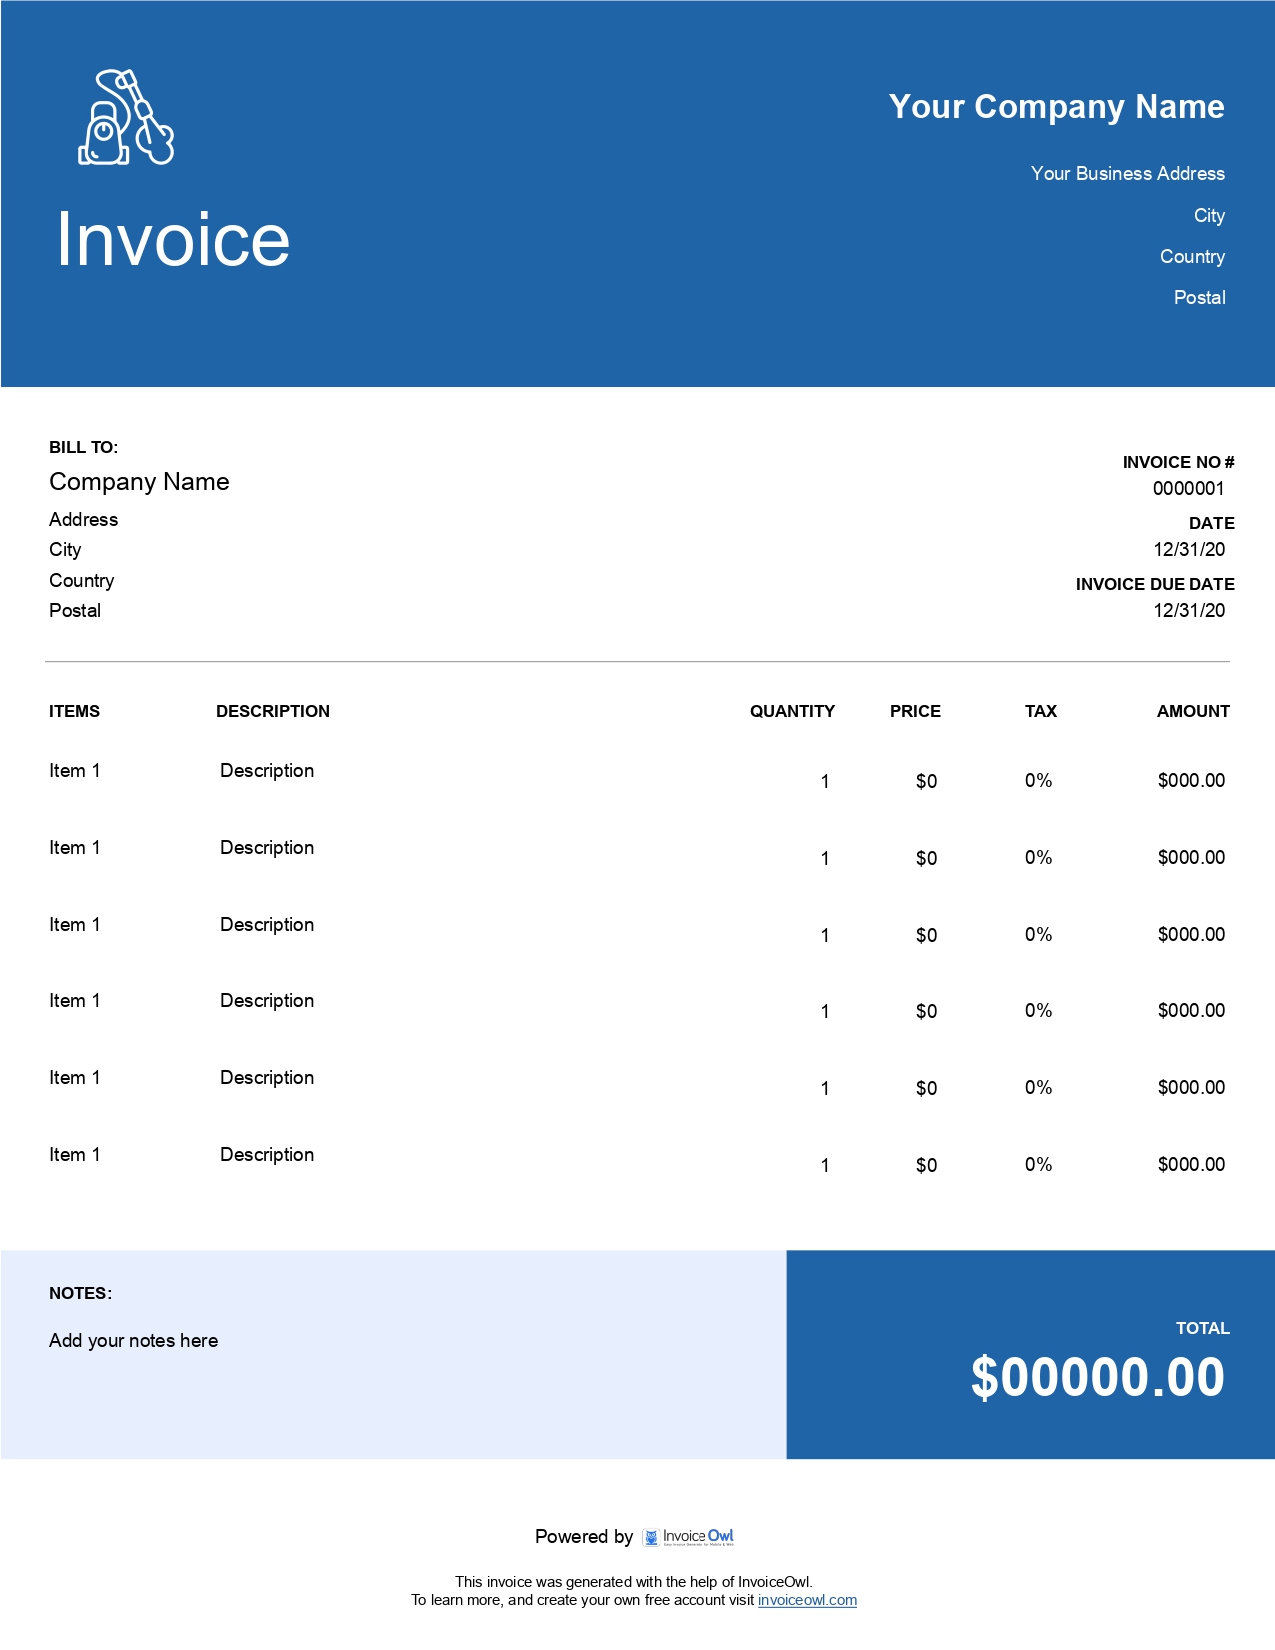 Cold water service invoice template